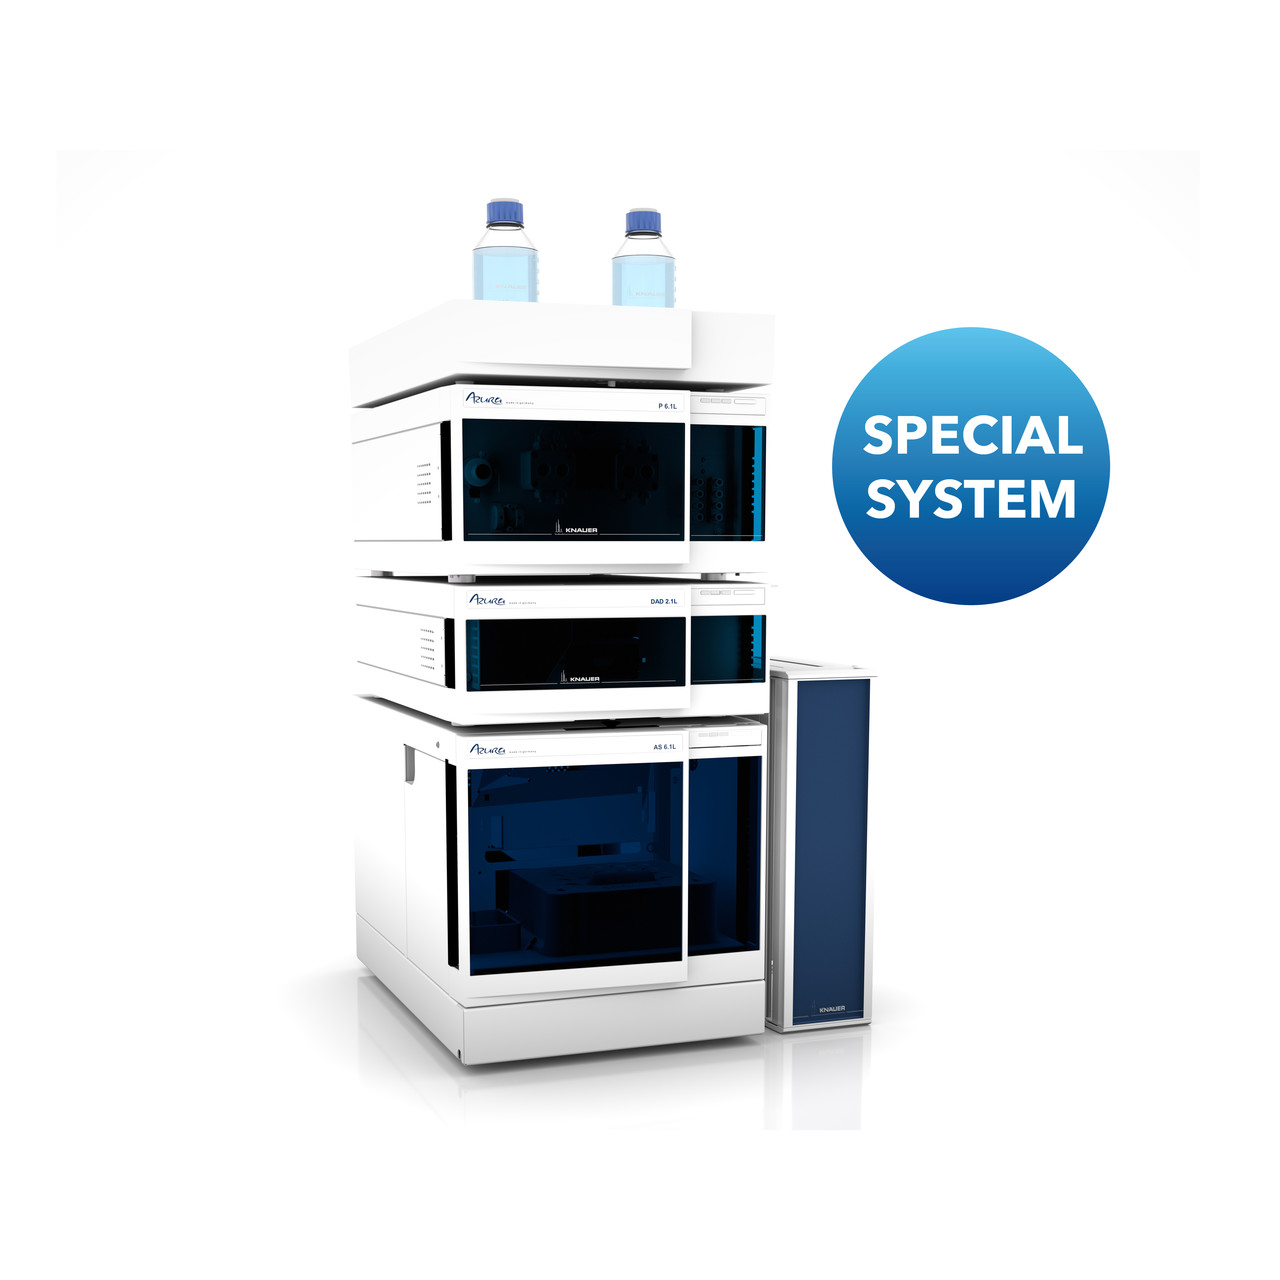 HPLC system for the analysis of carbonyl emissions in air - special system offer